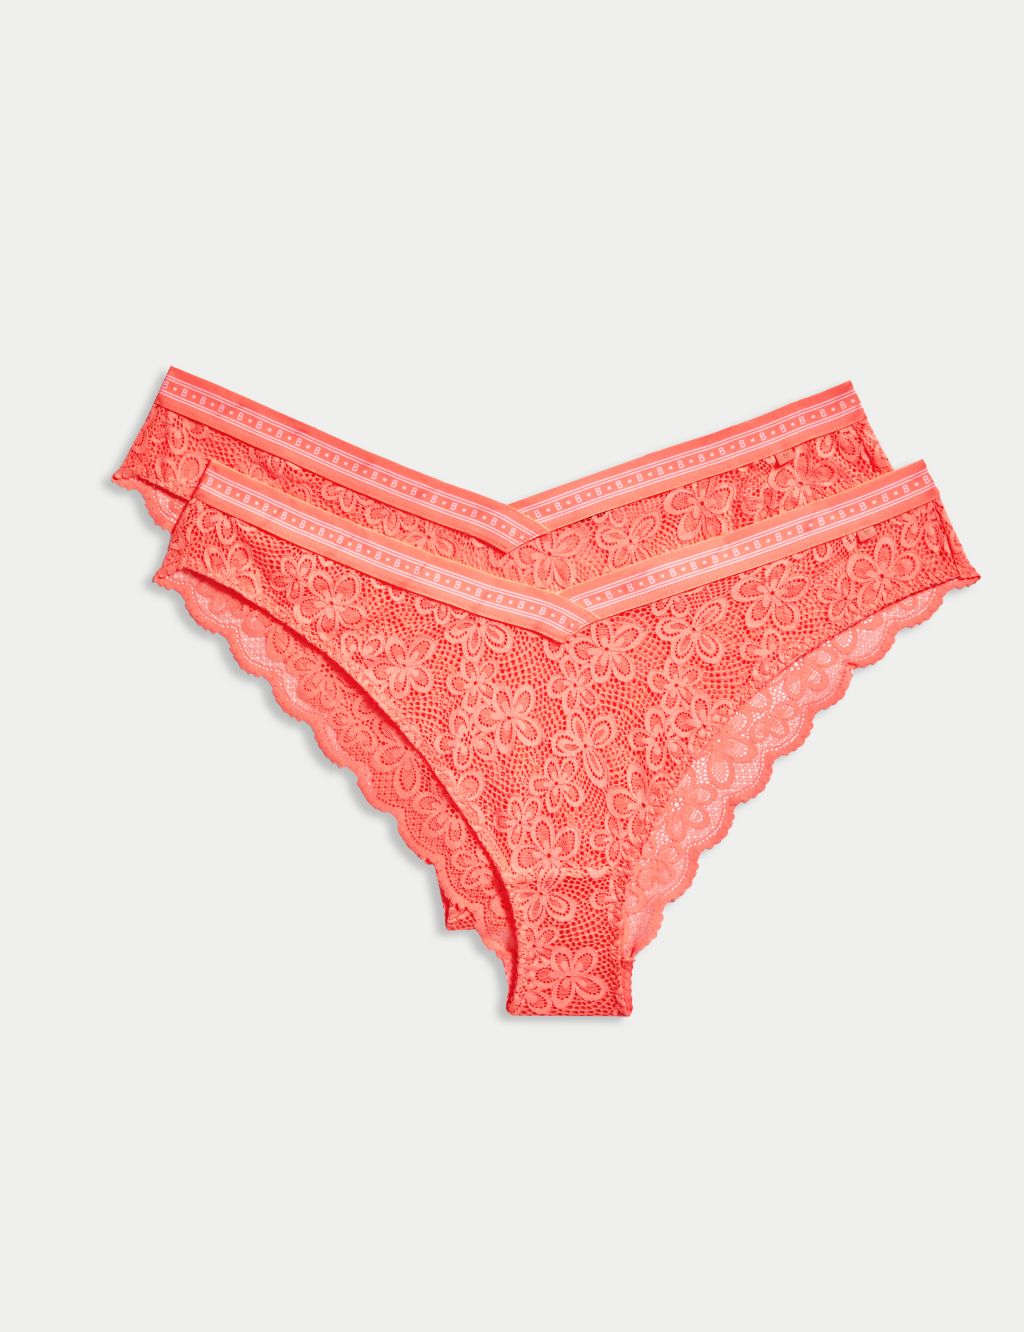 M&S Womens Marks and Spencer Orange Miami Knickers Size 18 x 3